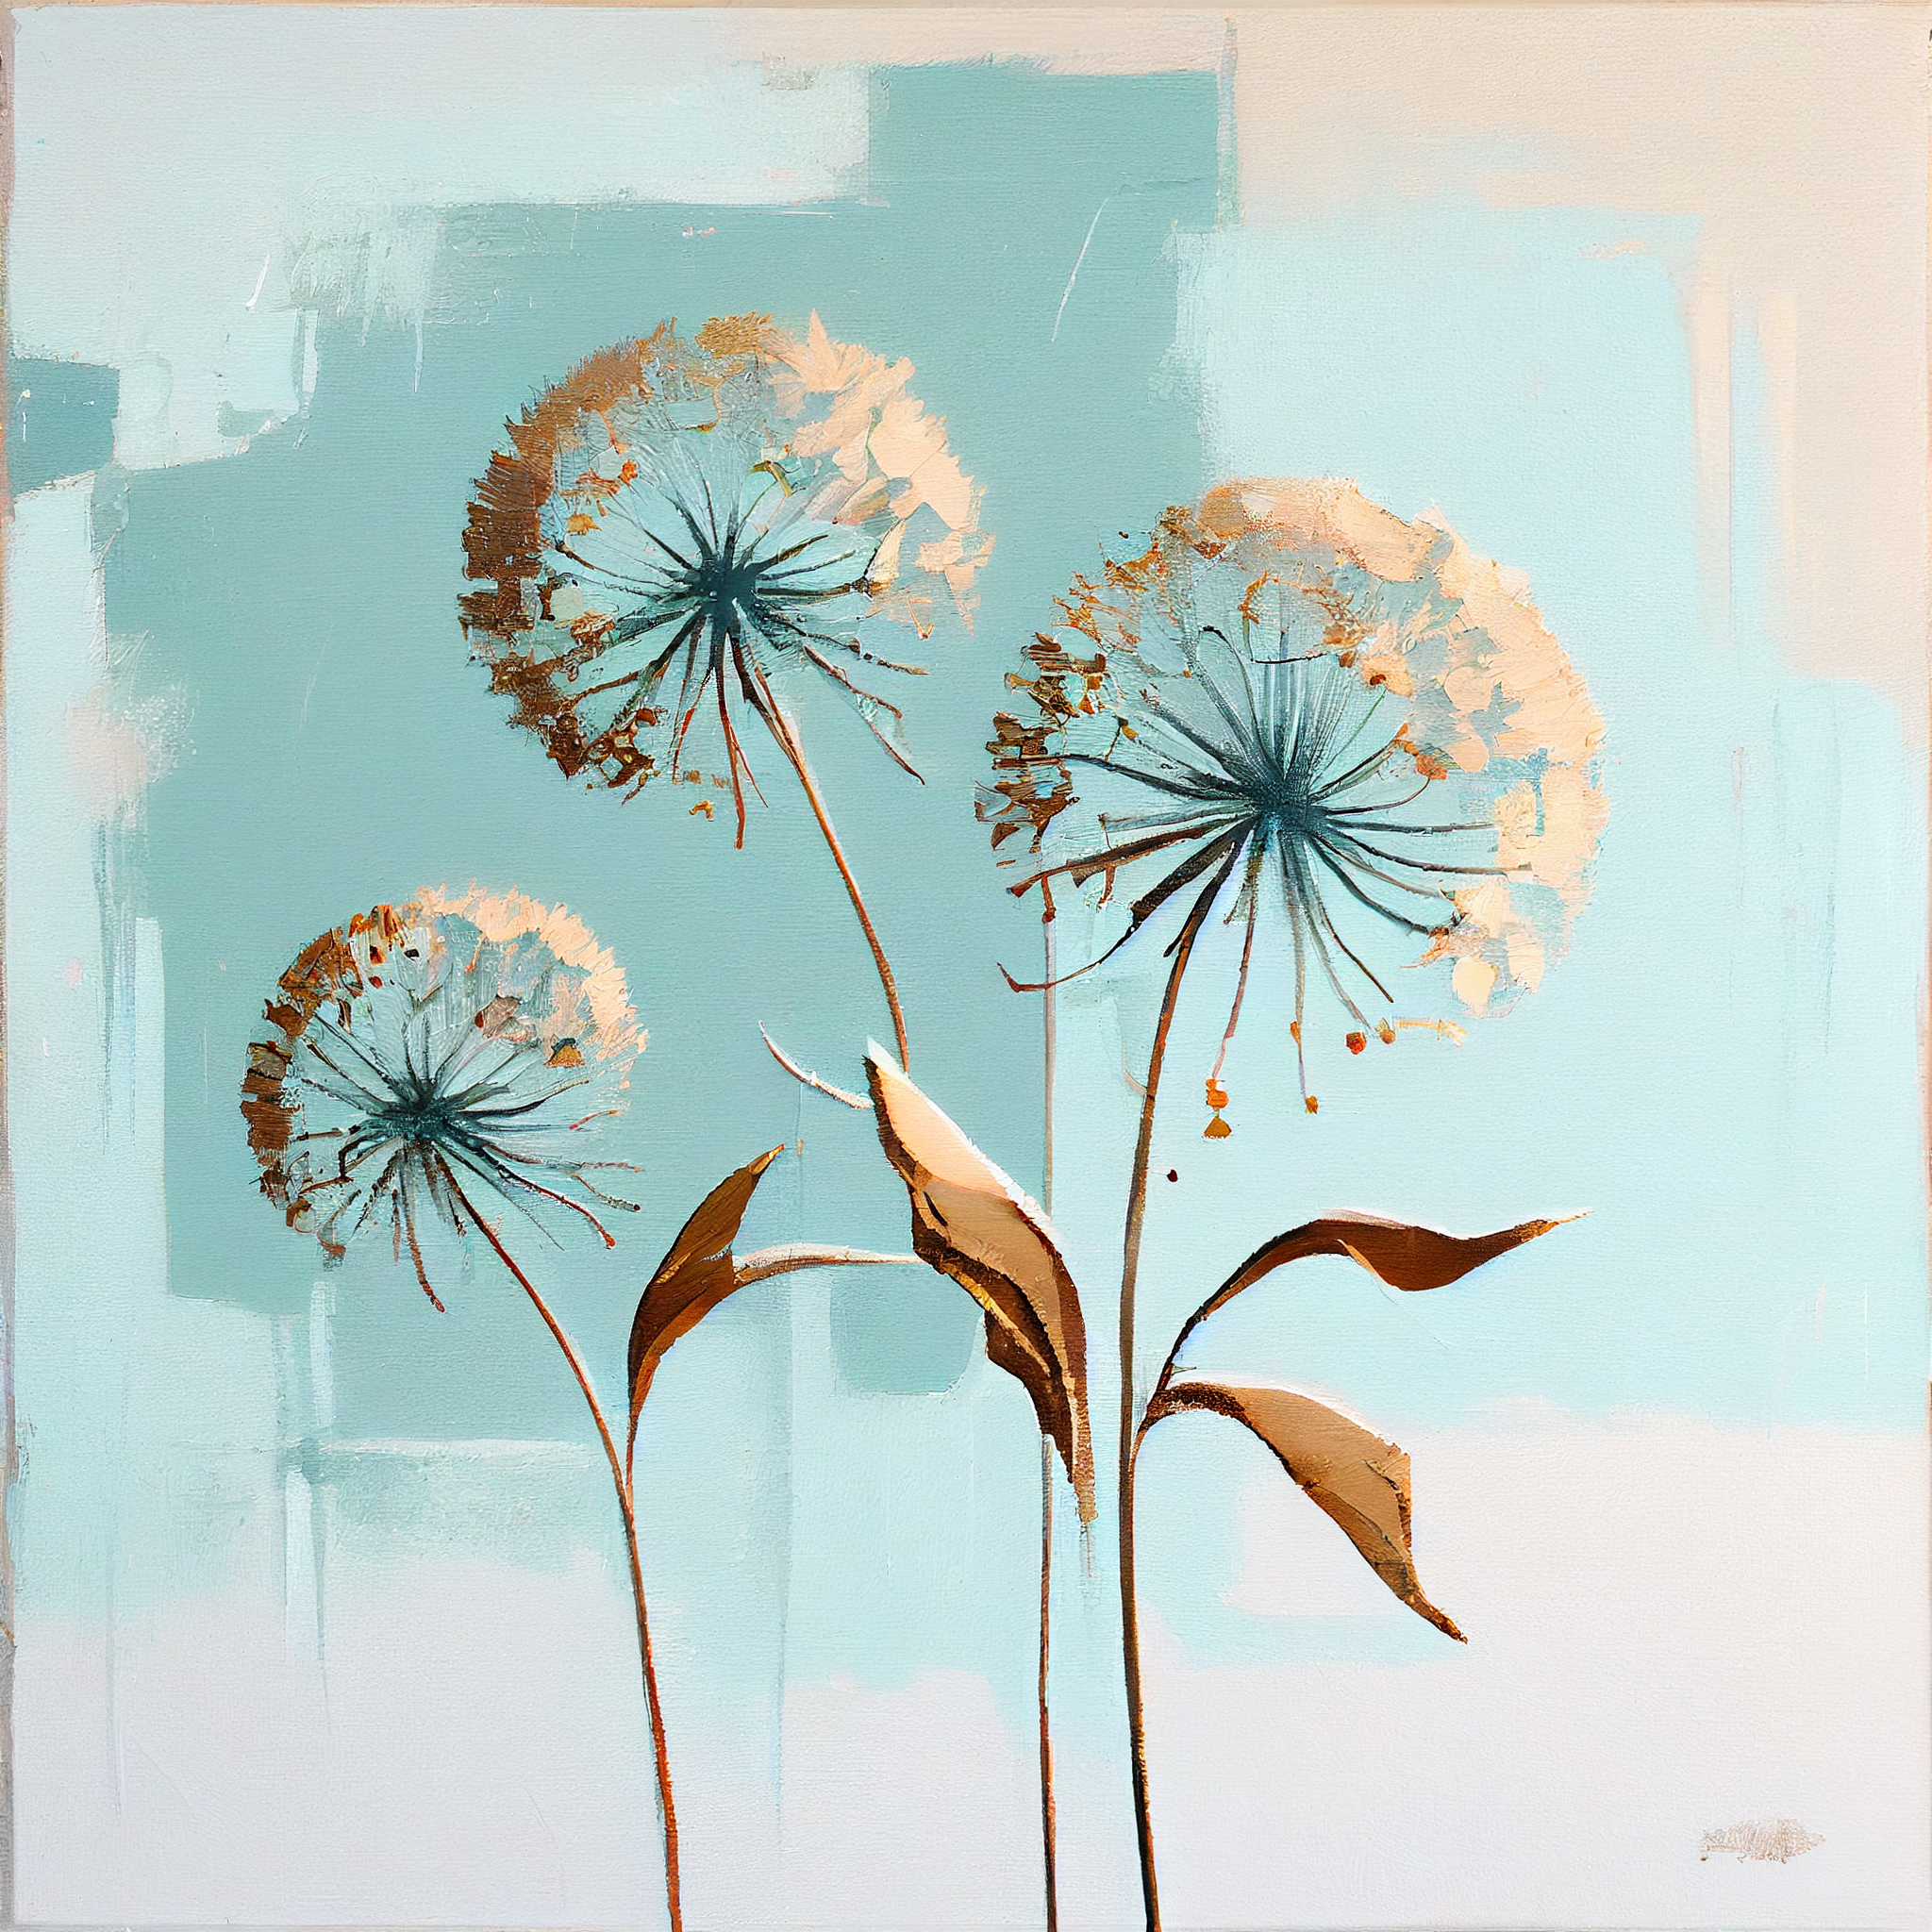 Three Abstract Dandelions Painting Print on Light Blue Background Perfect for Homes, Offices and Gifts Purposes